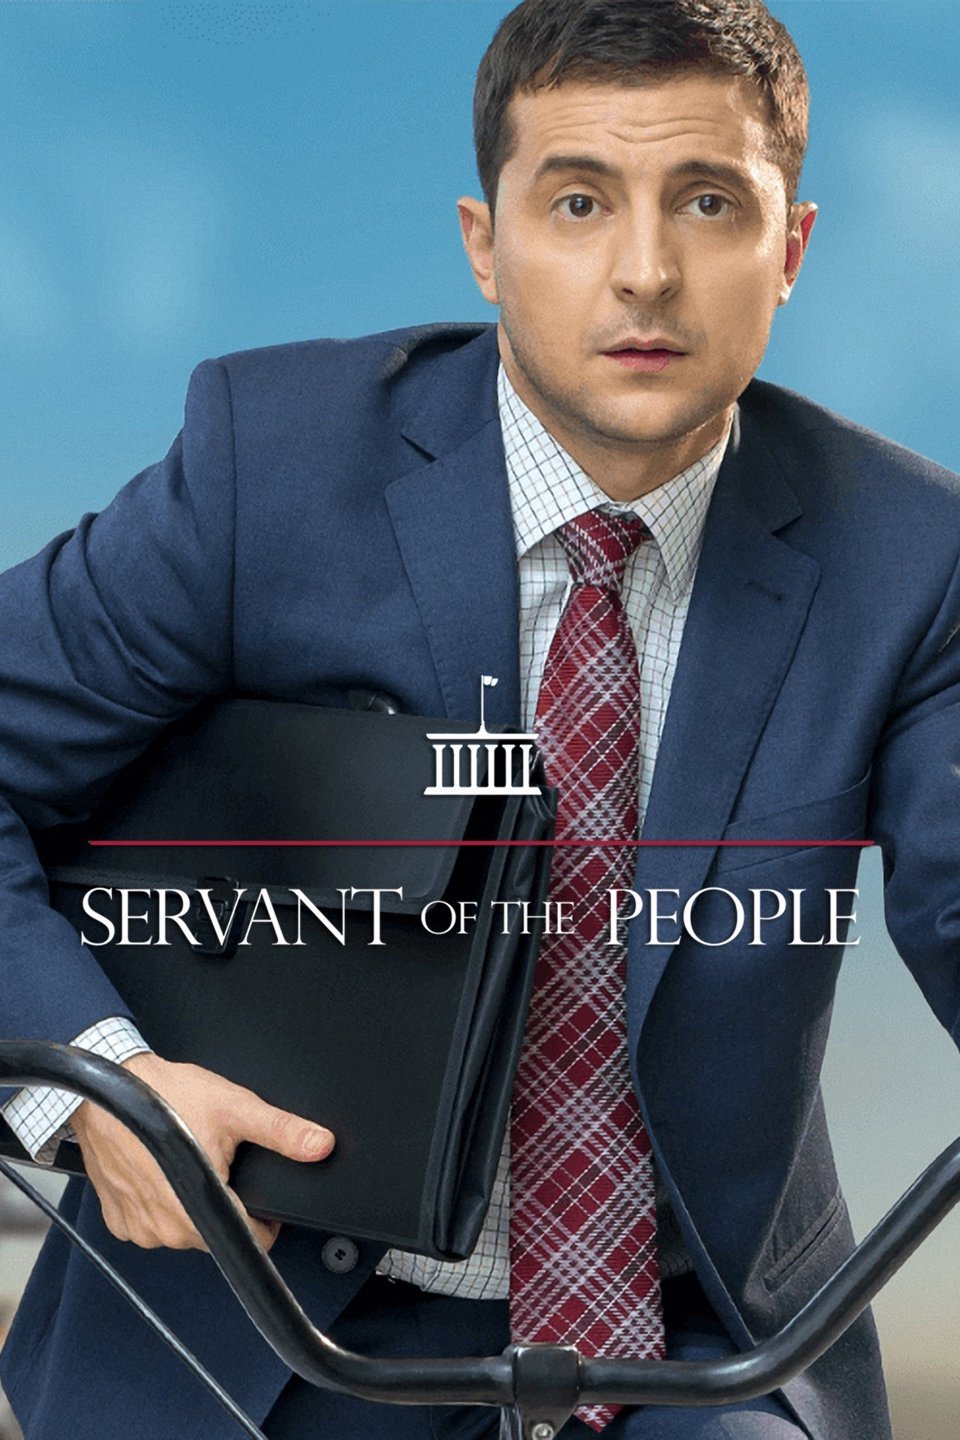 Servant of the people